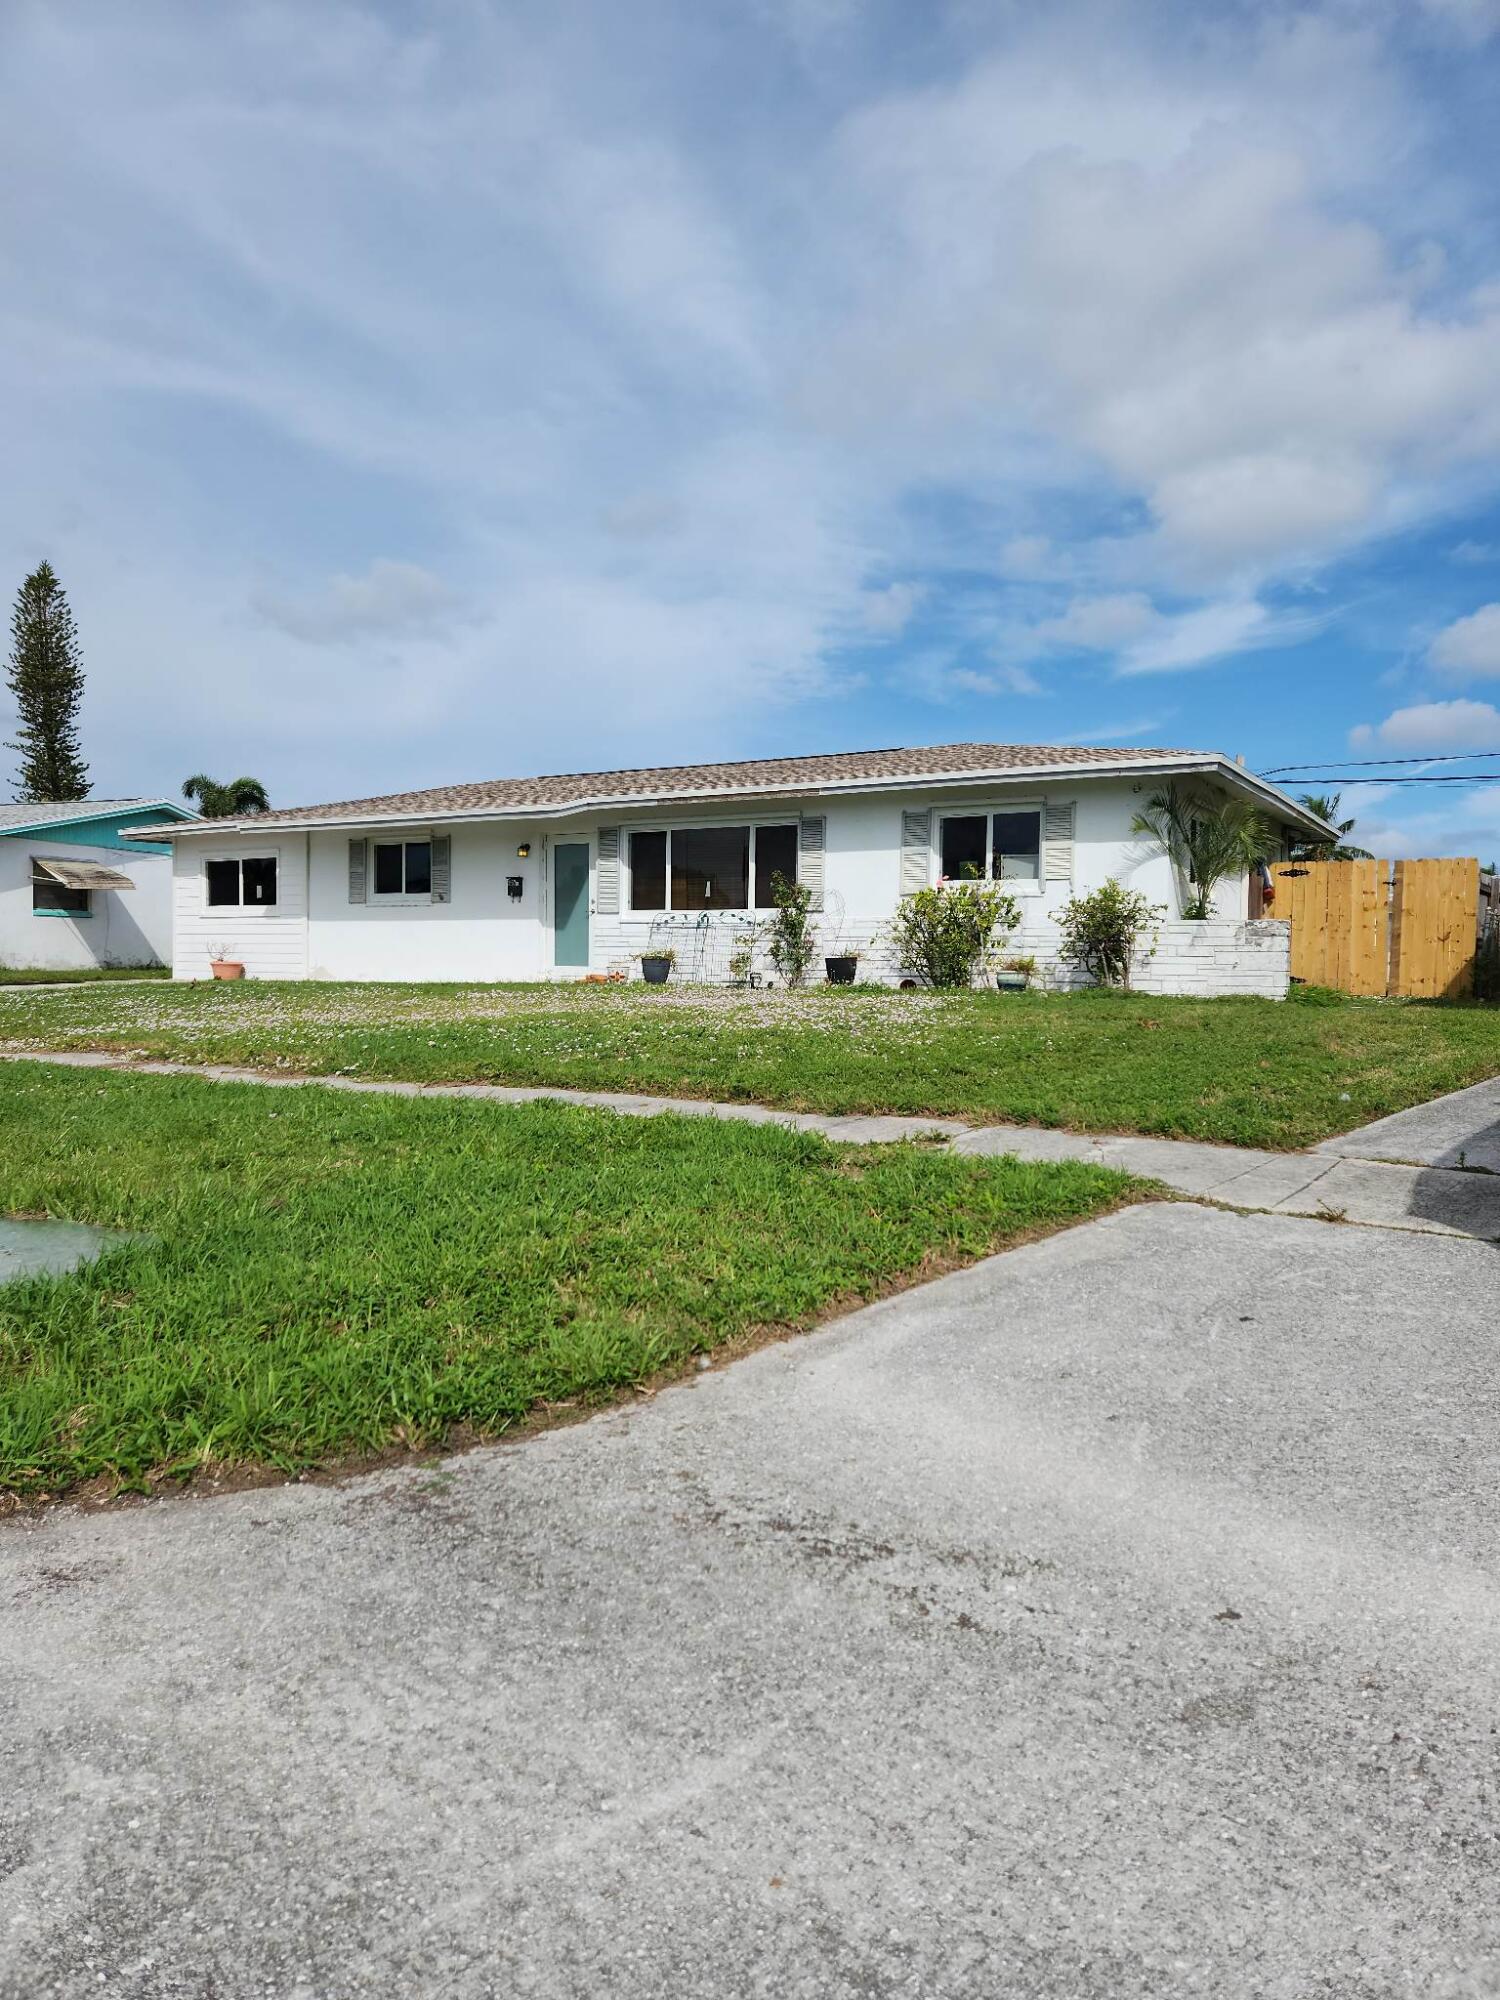 This home is located in the heart of Palm Beach Gardens in Cabana Colony. NO HOA. Estate Sale being held Fri 11/18, 9am-2pm and Sat 11/19, 9am-2pm at the property. Come see this amazing opportunity. More pictures to come.